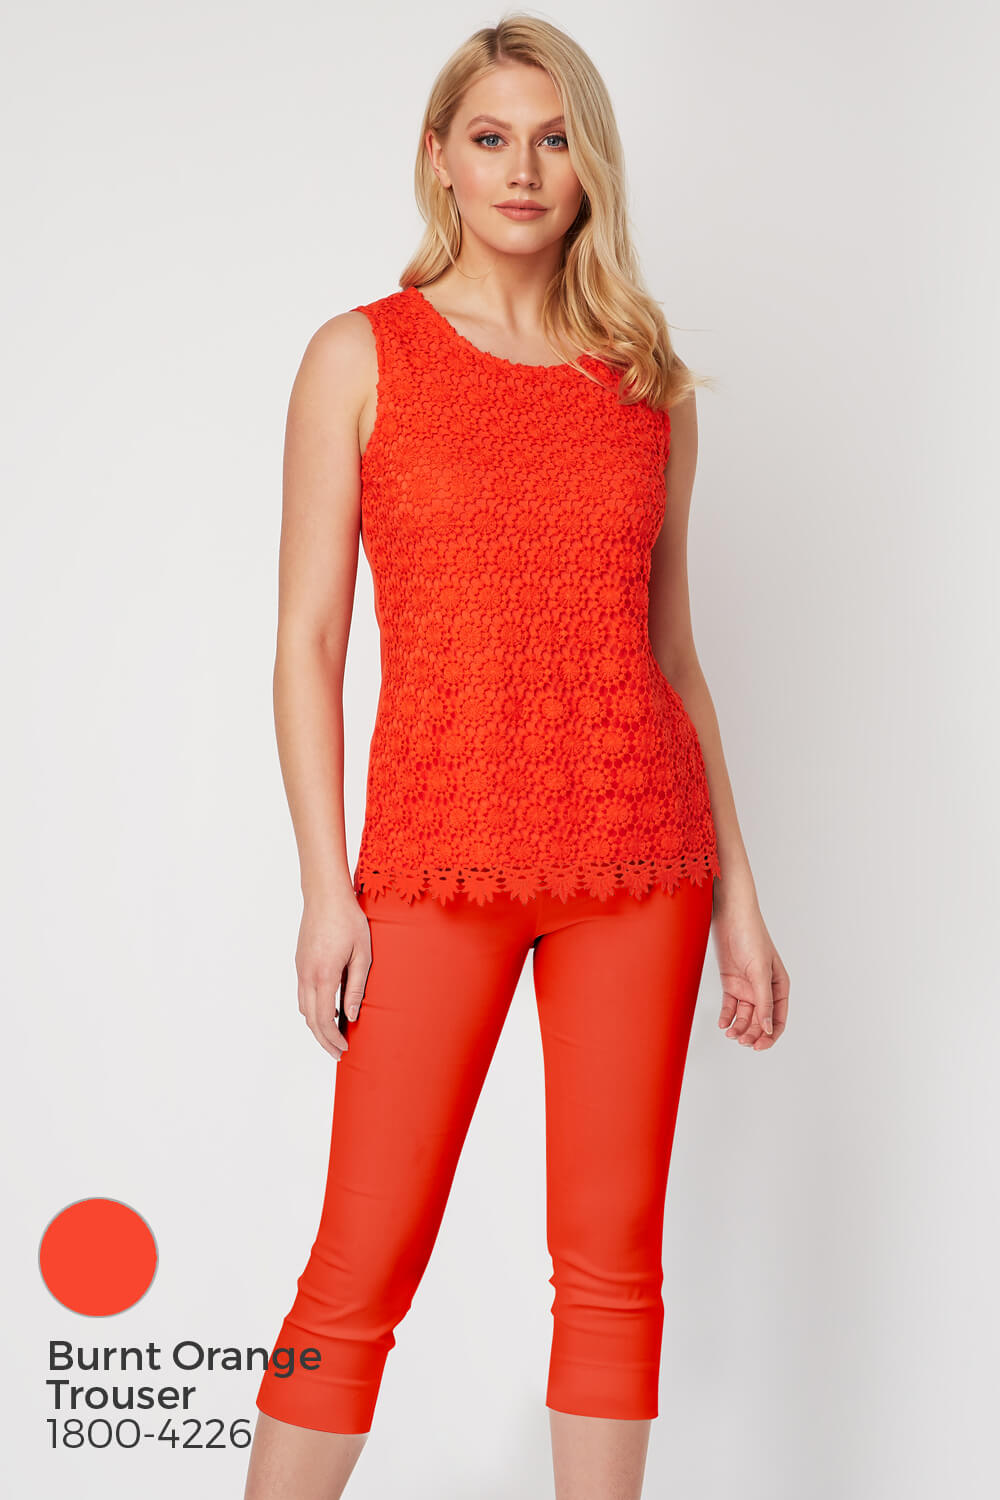 ORANGE Lace Jersey Top, Image 9 of 9